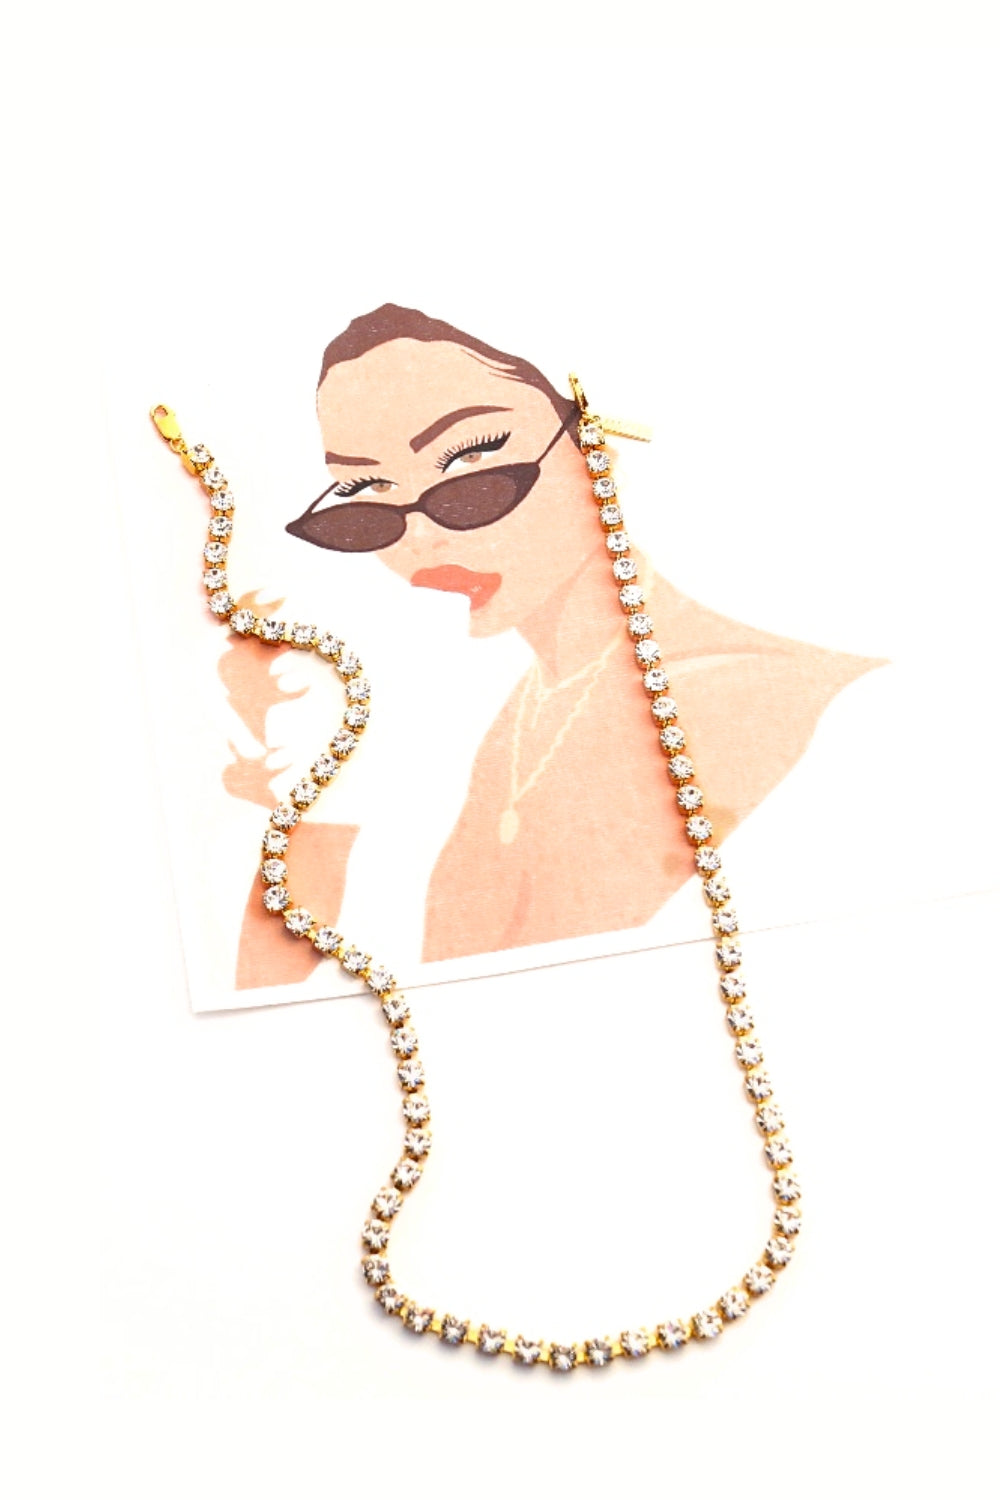 LEADING LADY - GOLD Crystals Eyewear Chain | SPECSET